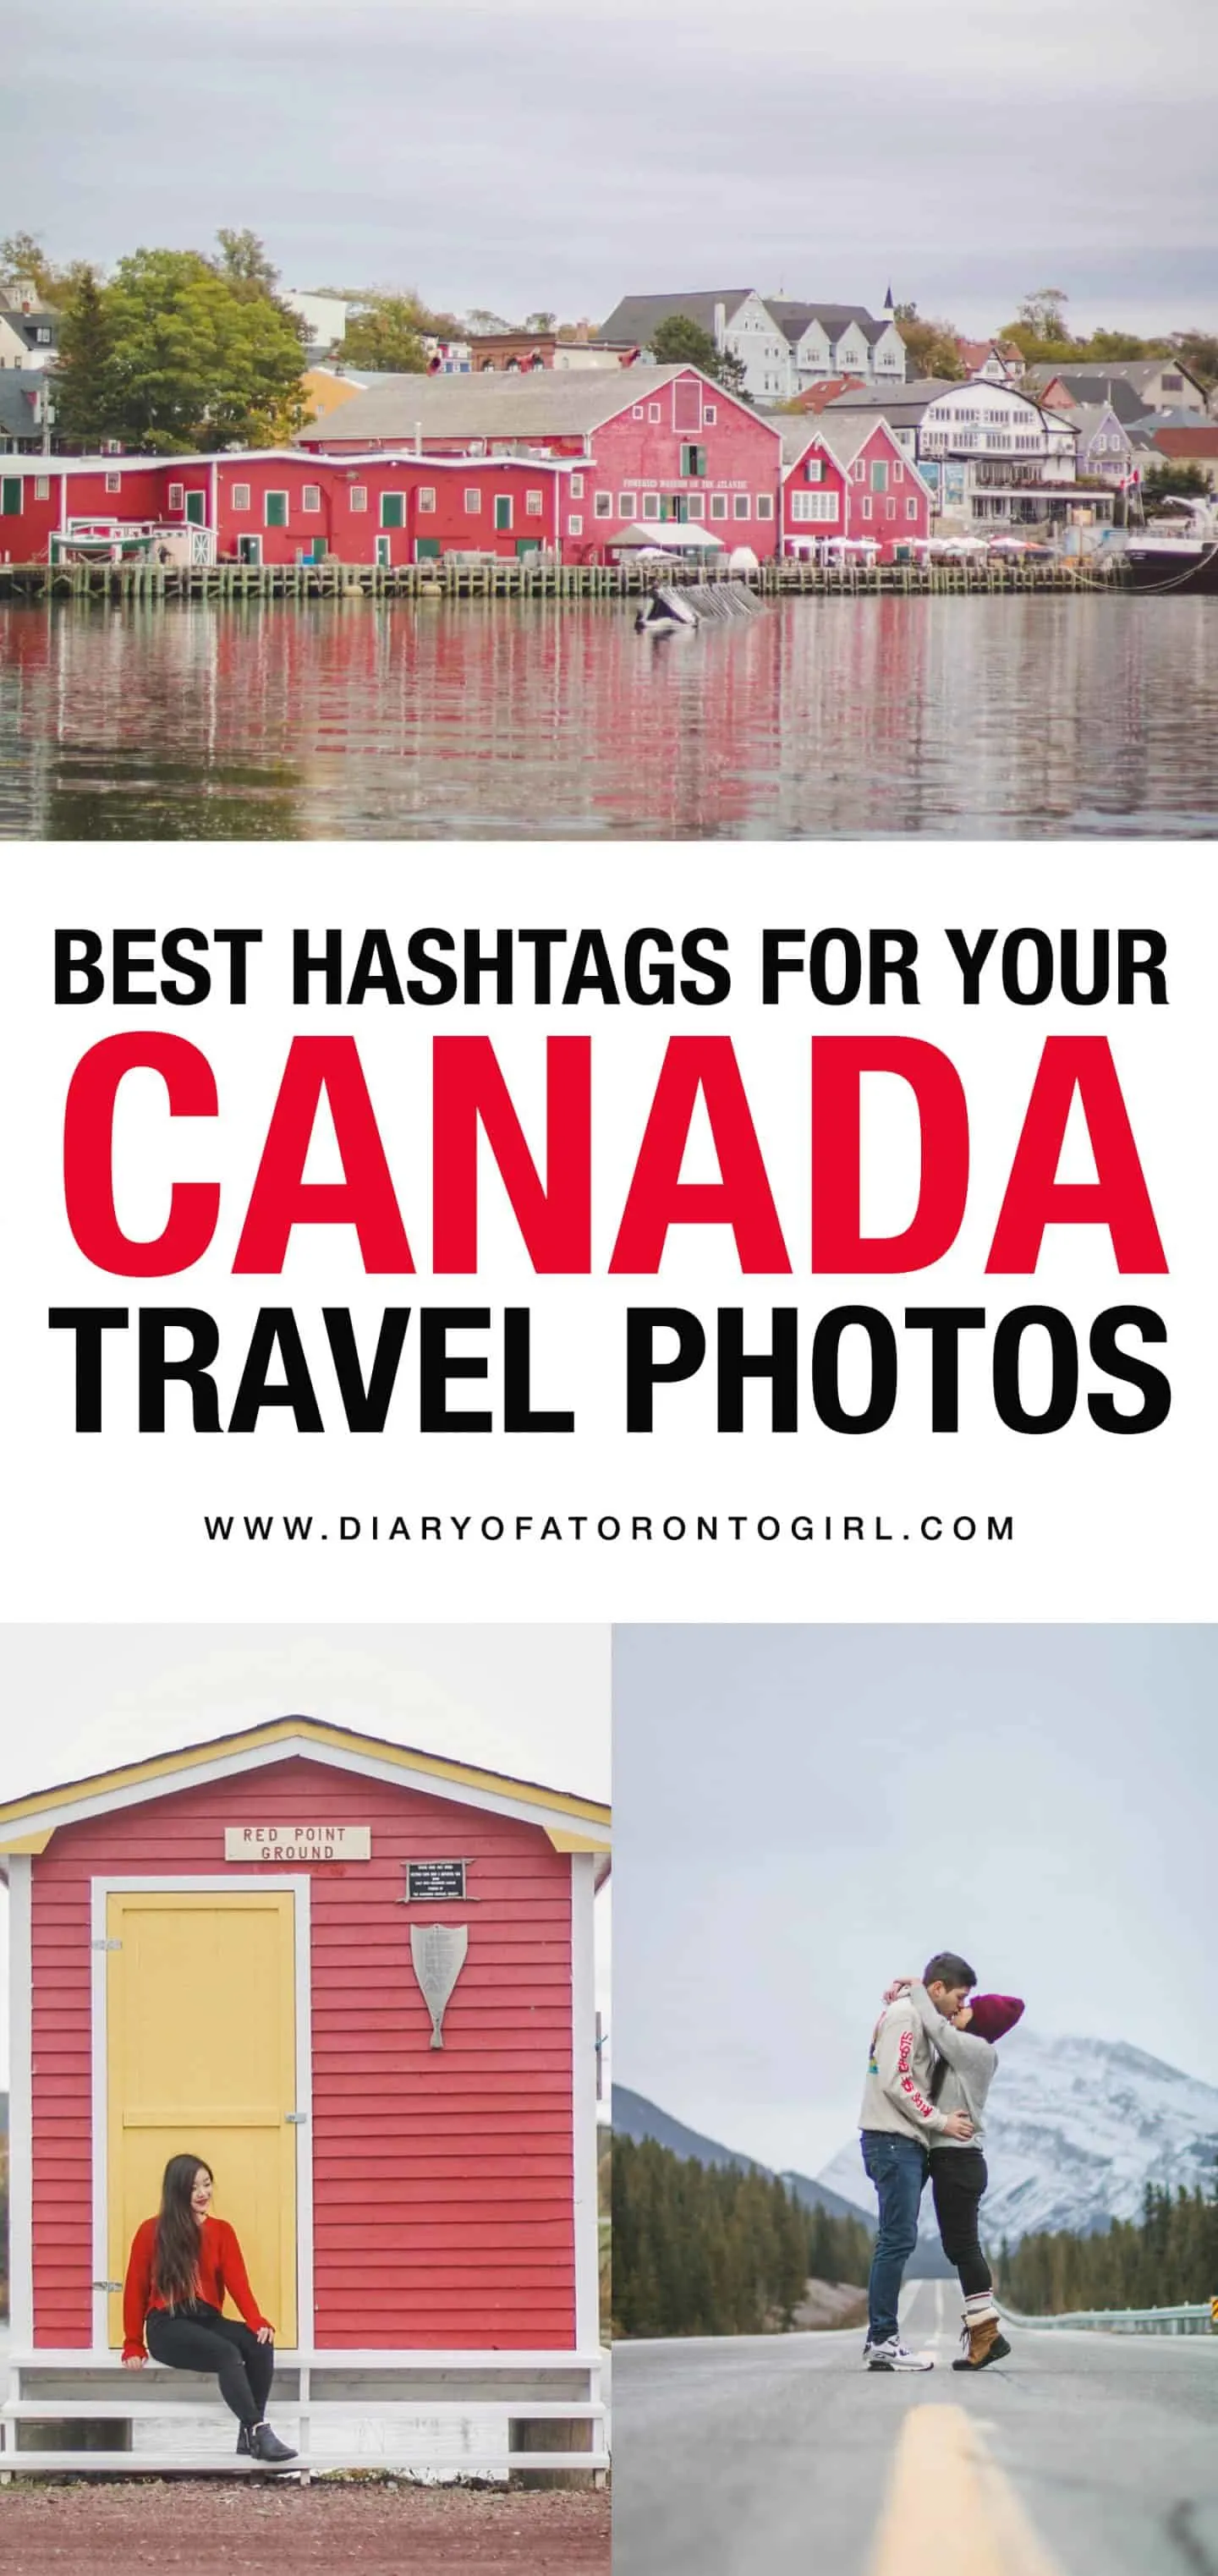 The best Instagram hashtags to use for your Canadian travel photos, in case you're planning a visit to any provinces or territories in Canada!